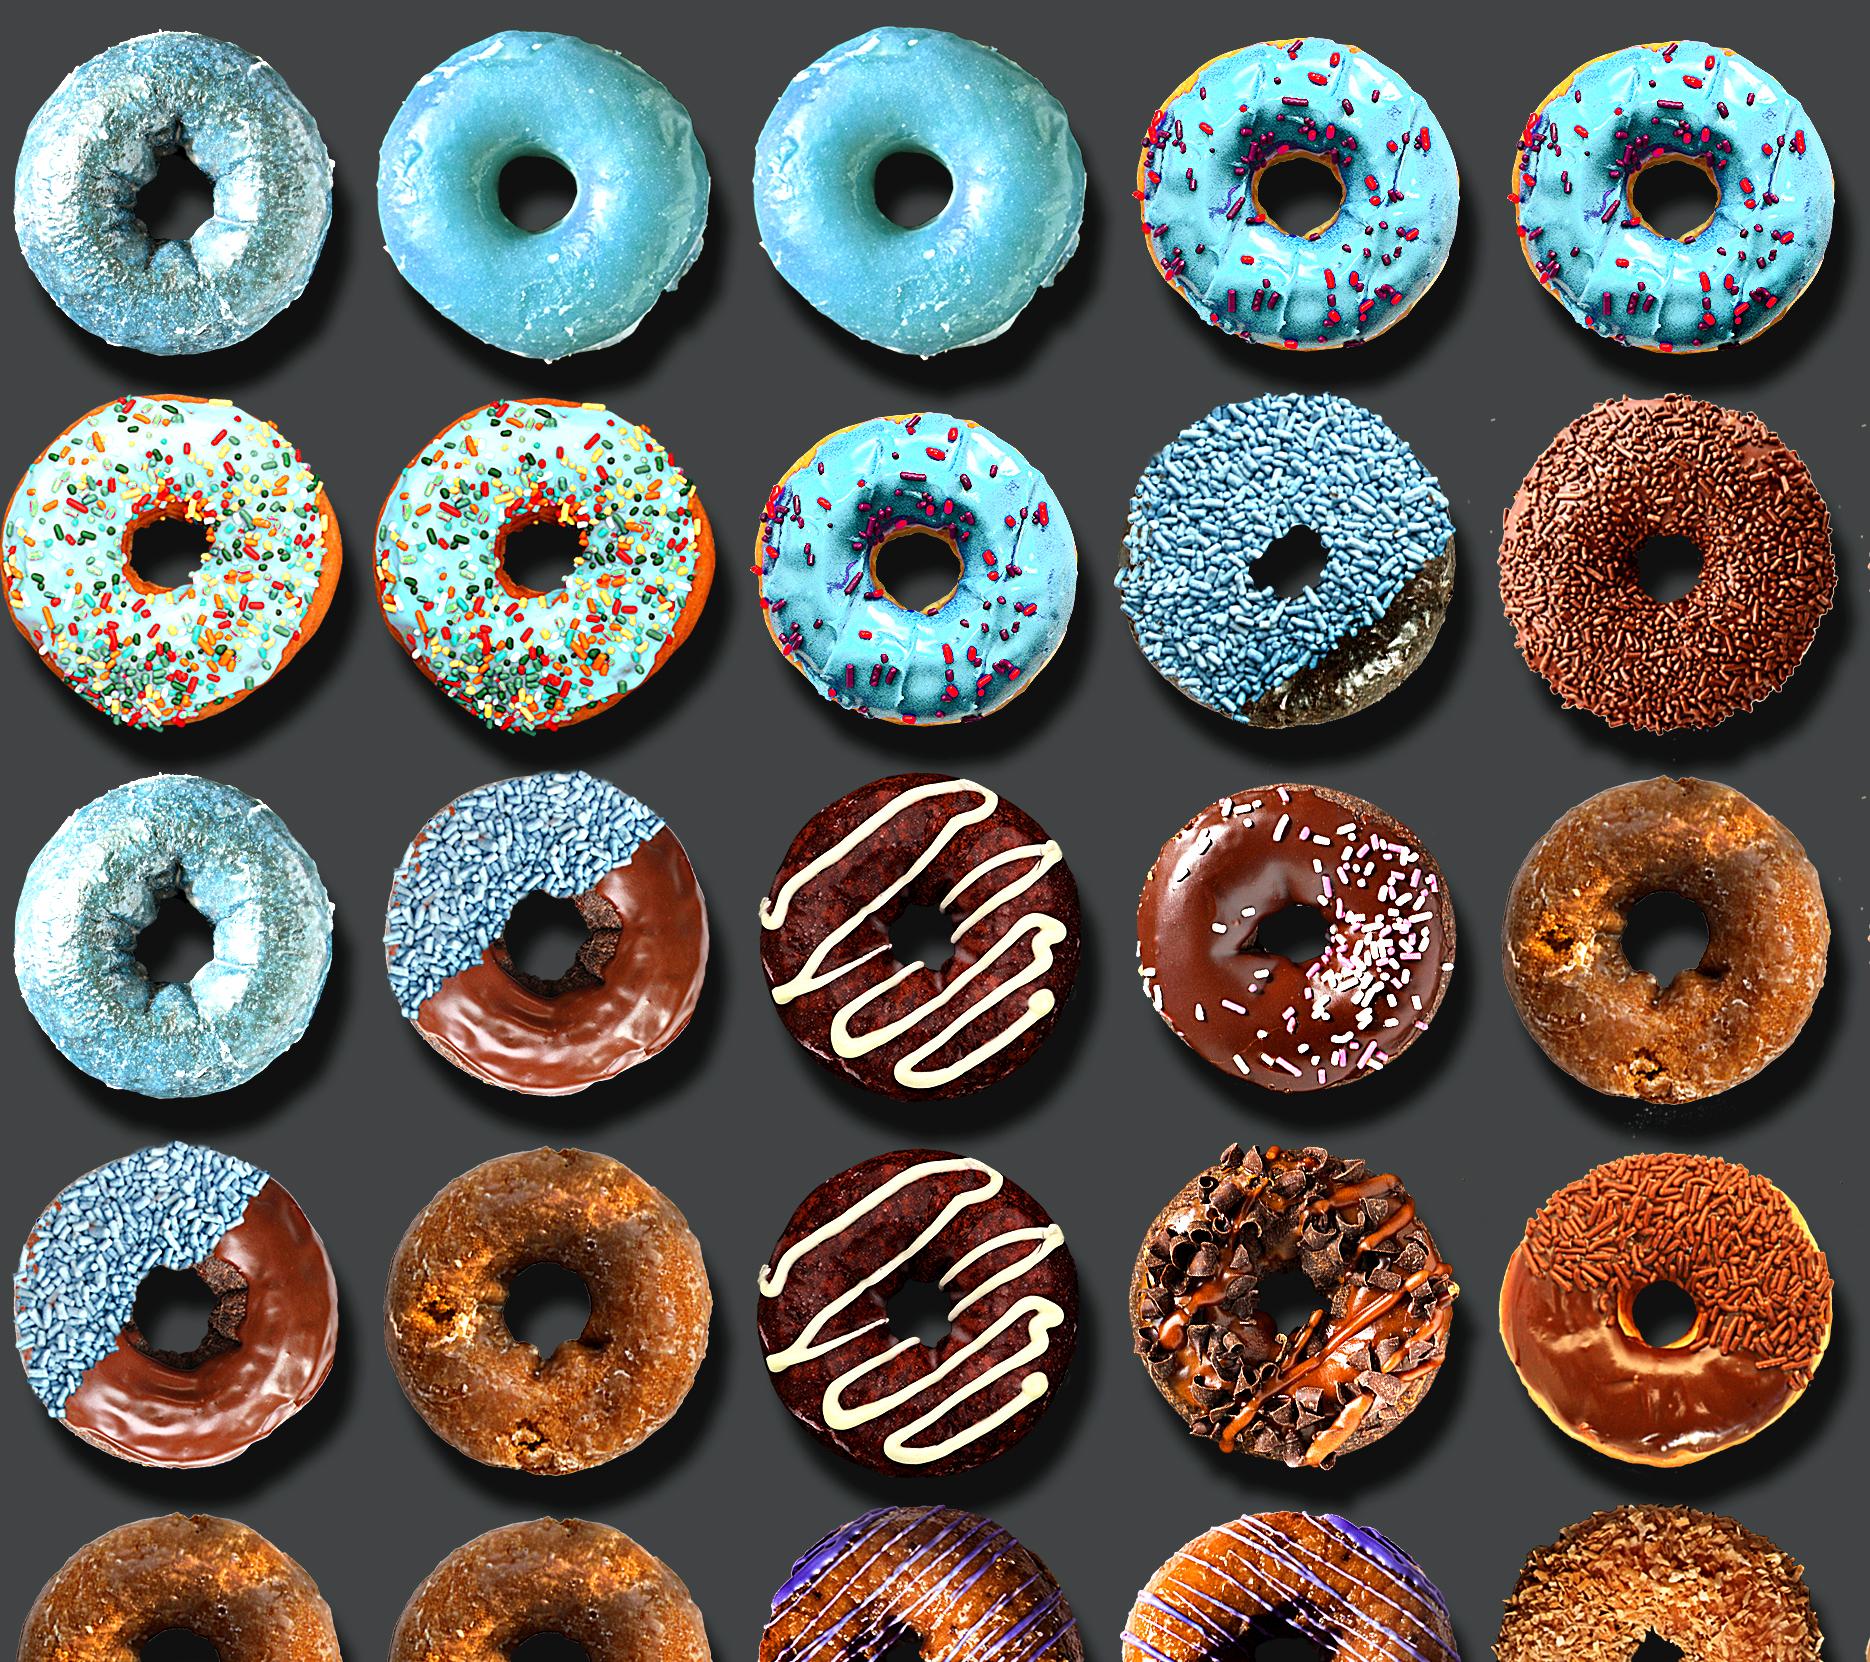 You have read about the extraordinary donut portraits by Candice CMC on social media world-wide and we are excited and proud to represent her work.

I have included in this listing an image from some of the world-wide Social Media Buzz on Candice